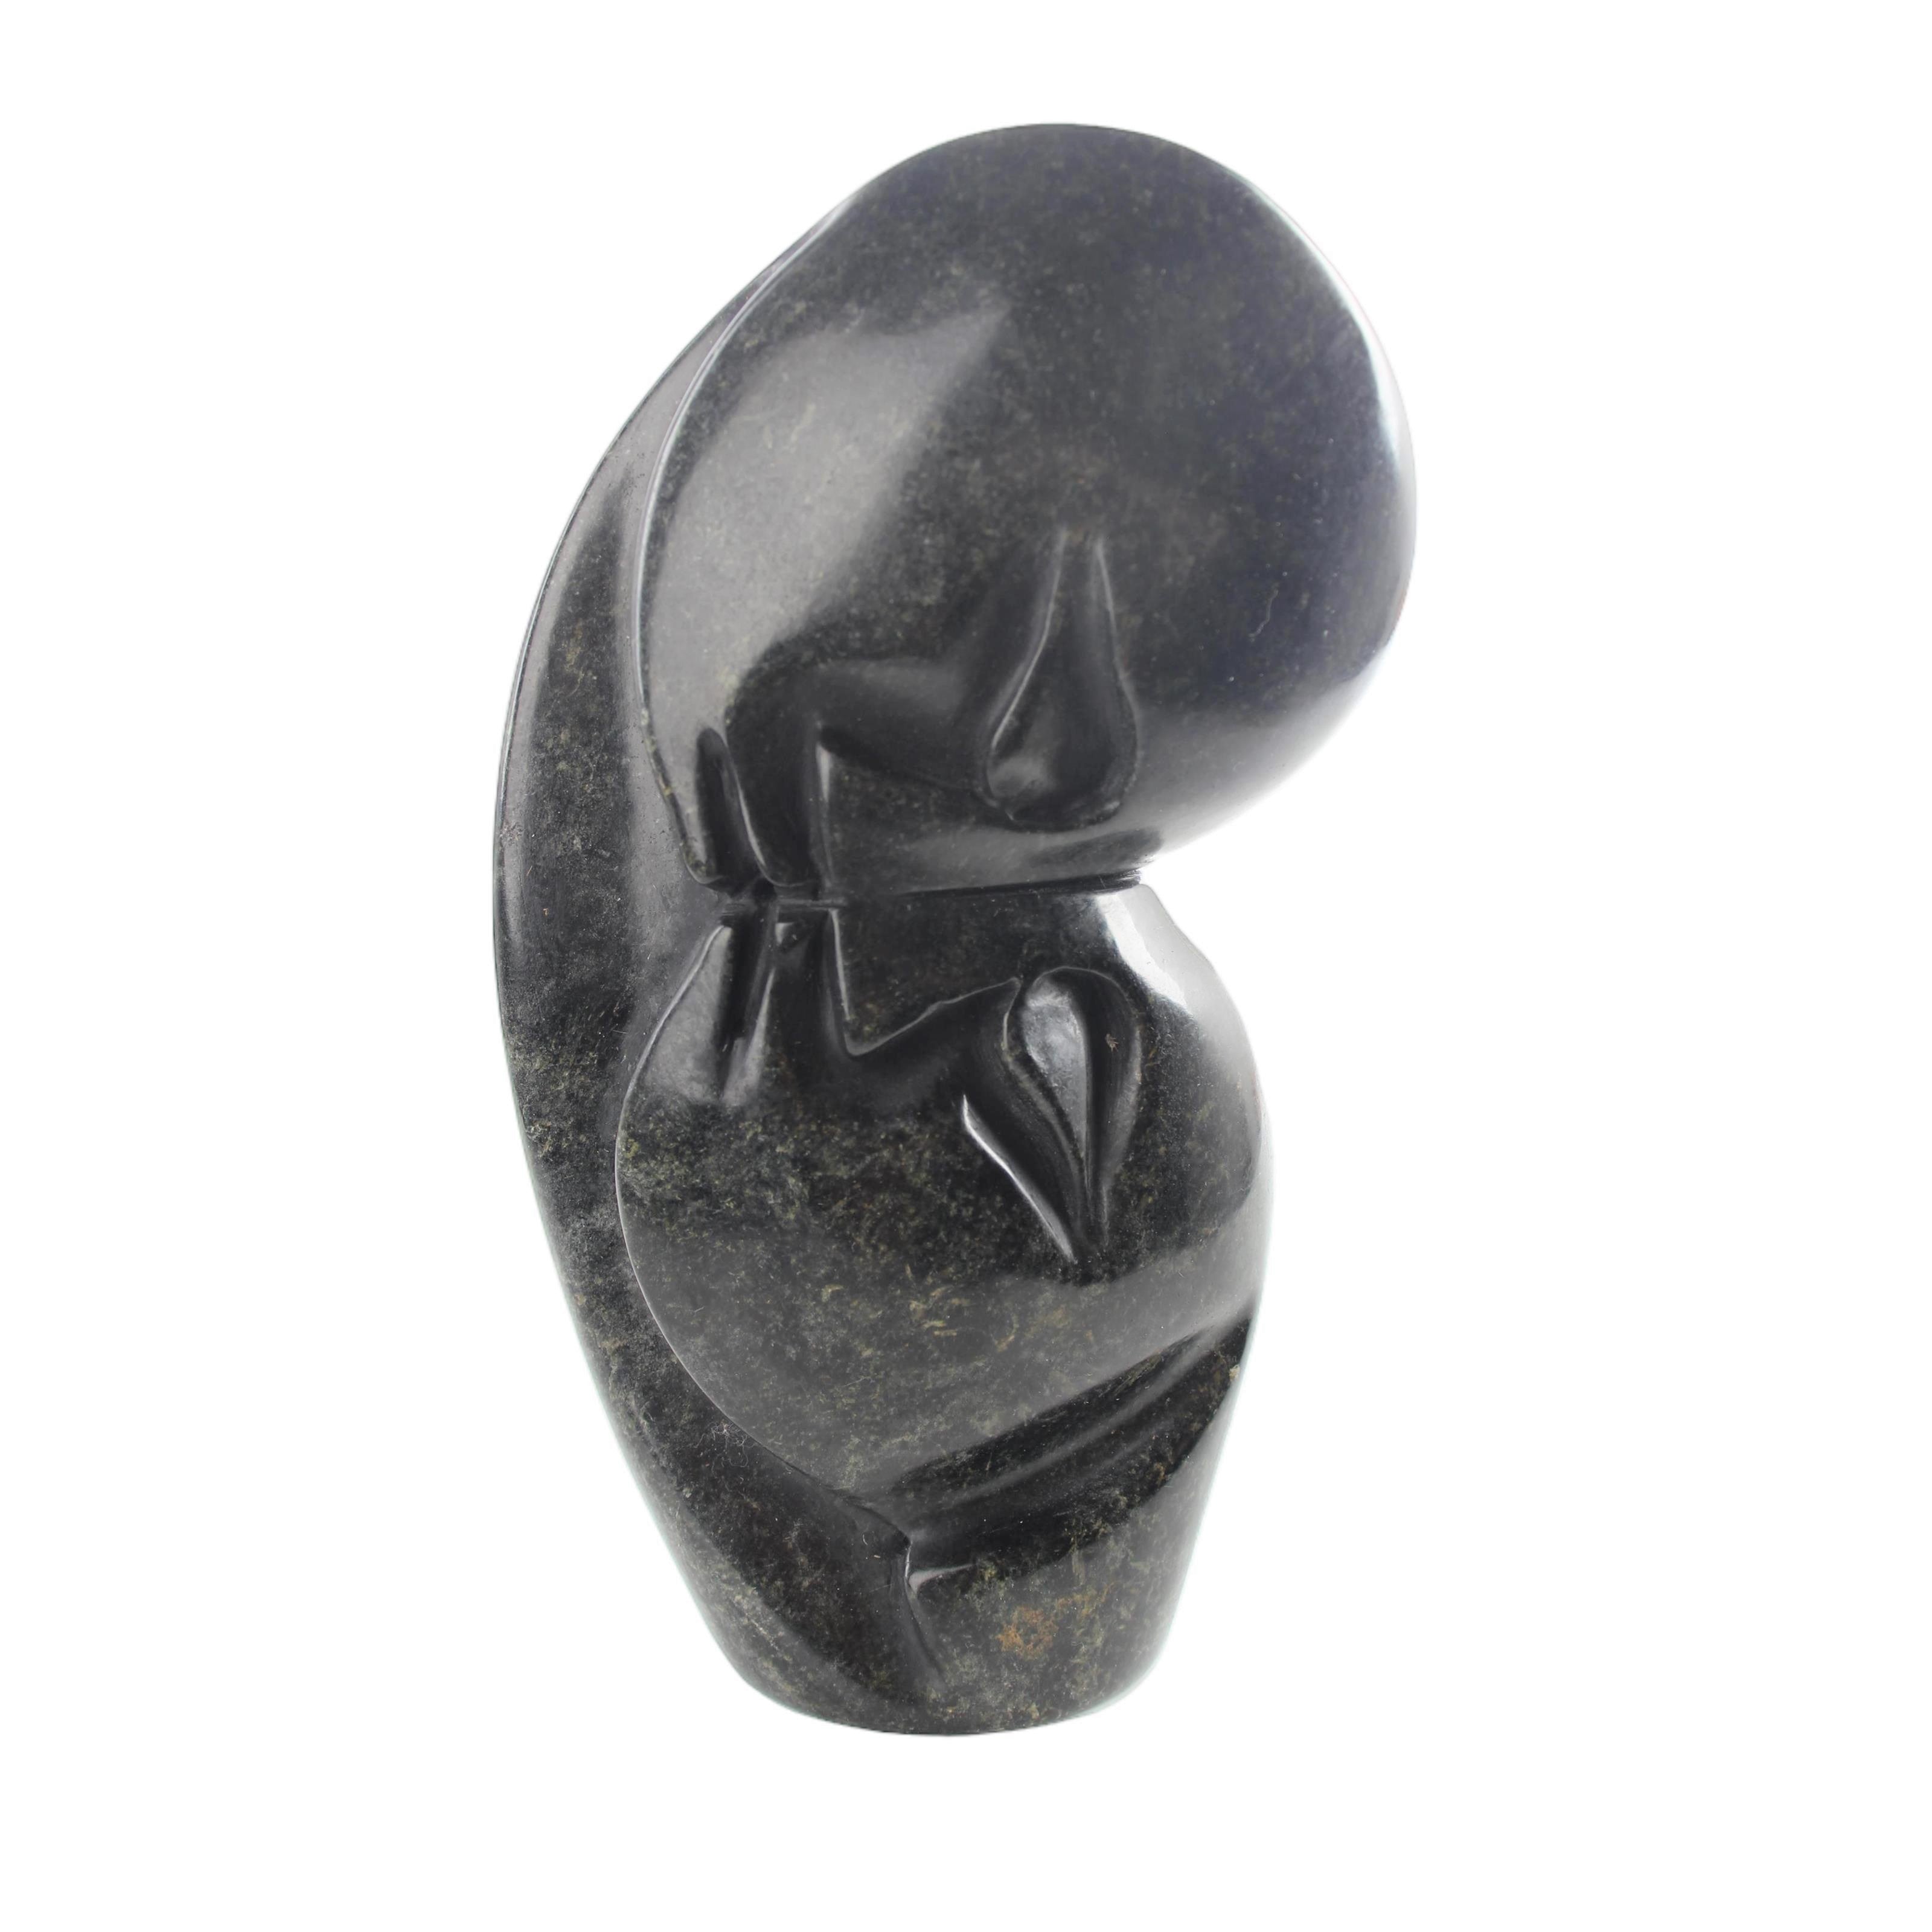 Shona Tribe Serpentine Stone Lovers ~7.9" Tall - Lovers